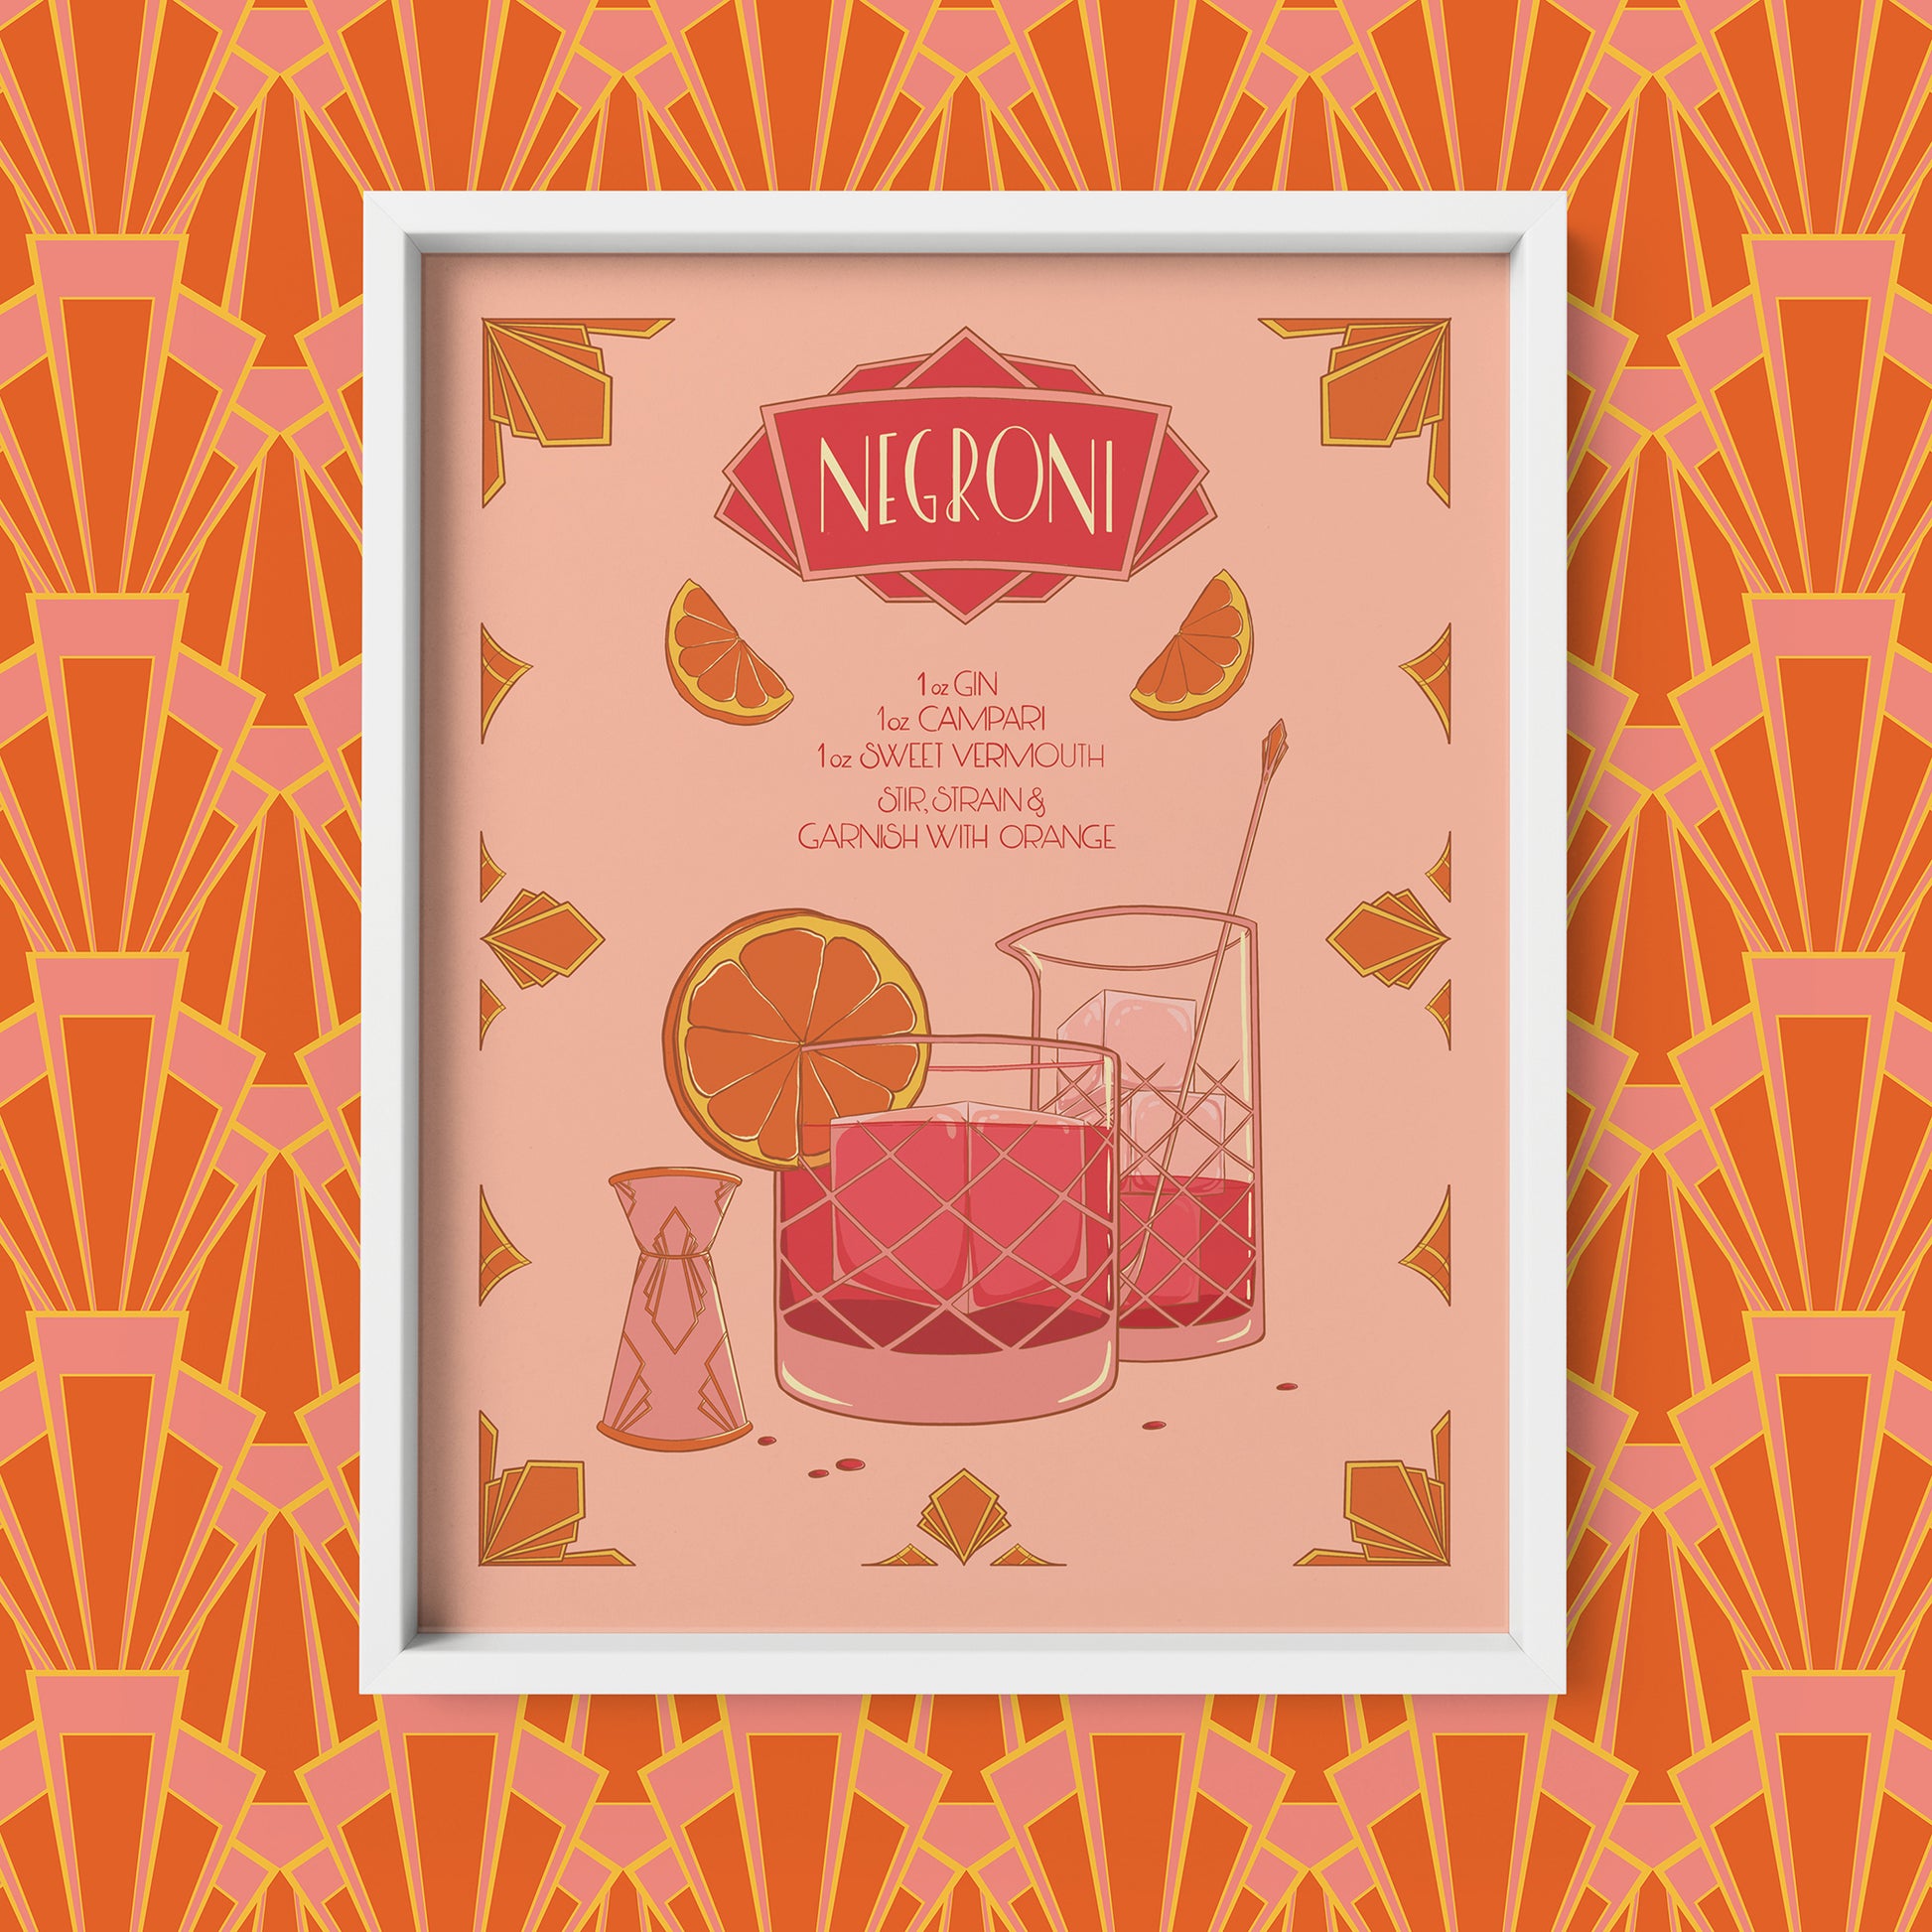 A pink and orange art-deco inspired, hand-lettered illustrated recipe of a Negroni features a glass of the drink itself, a mixing glass, a jigger, and art deco flourishes. The artwork appears in a white frame against an orange and pink art deco pattern.